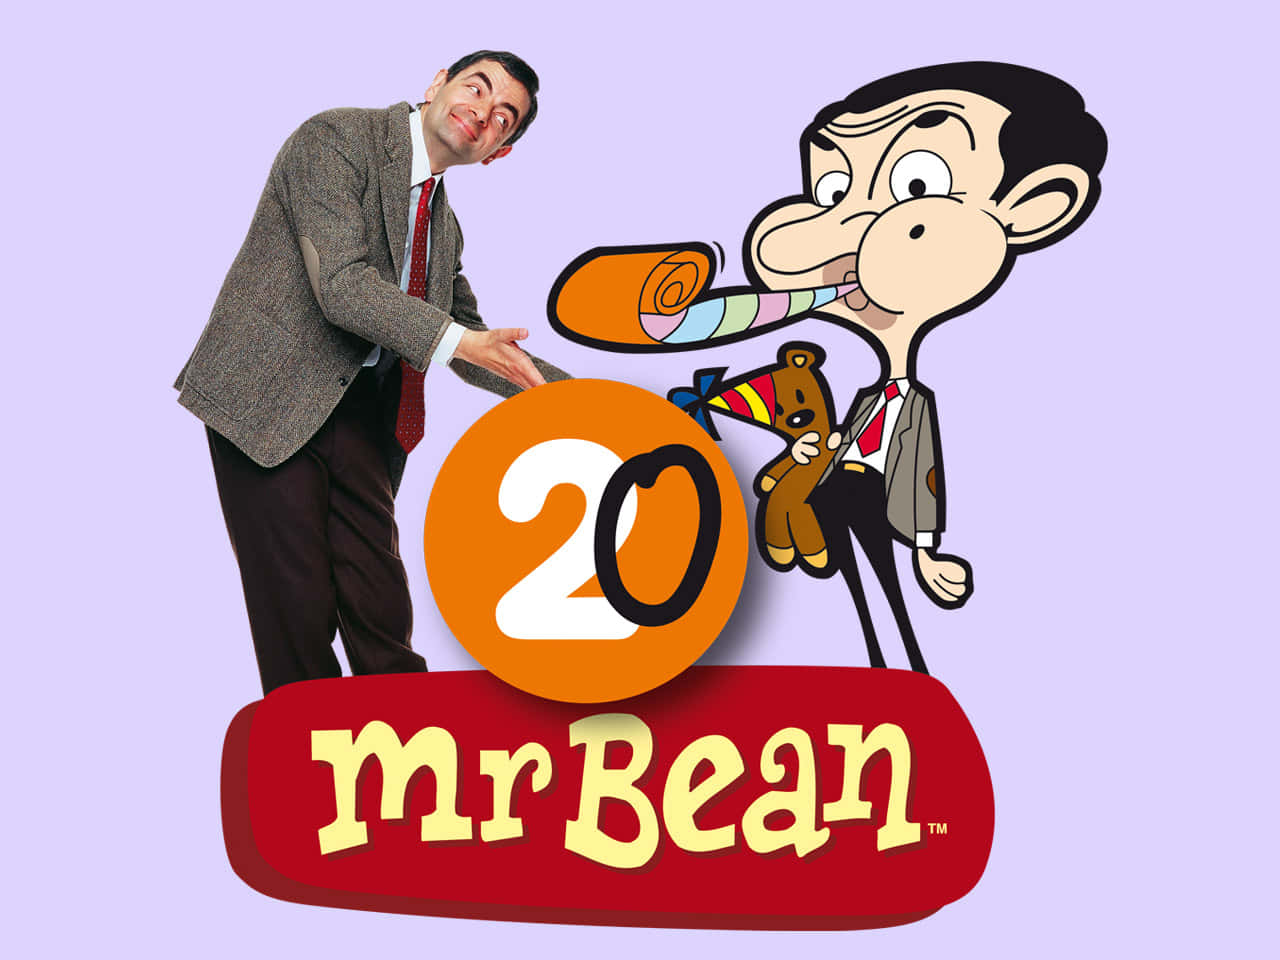 The Comedic Charm of Mr. Bean